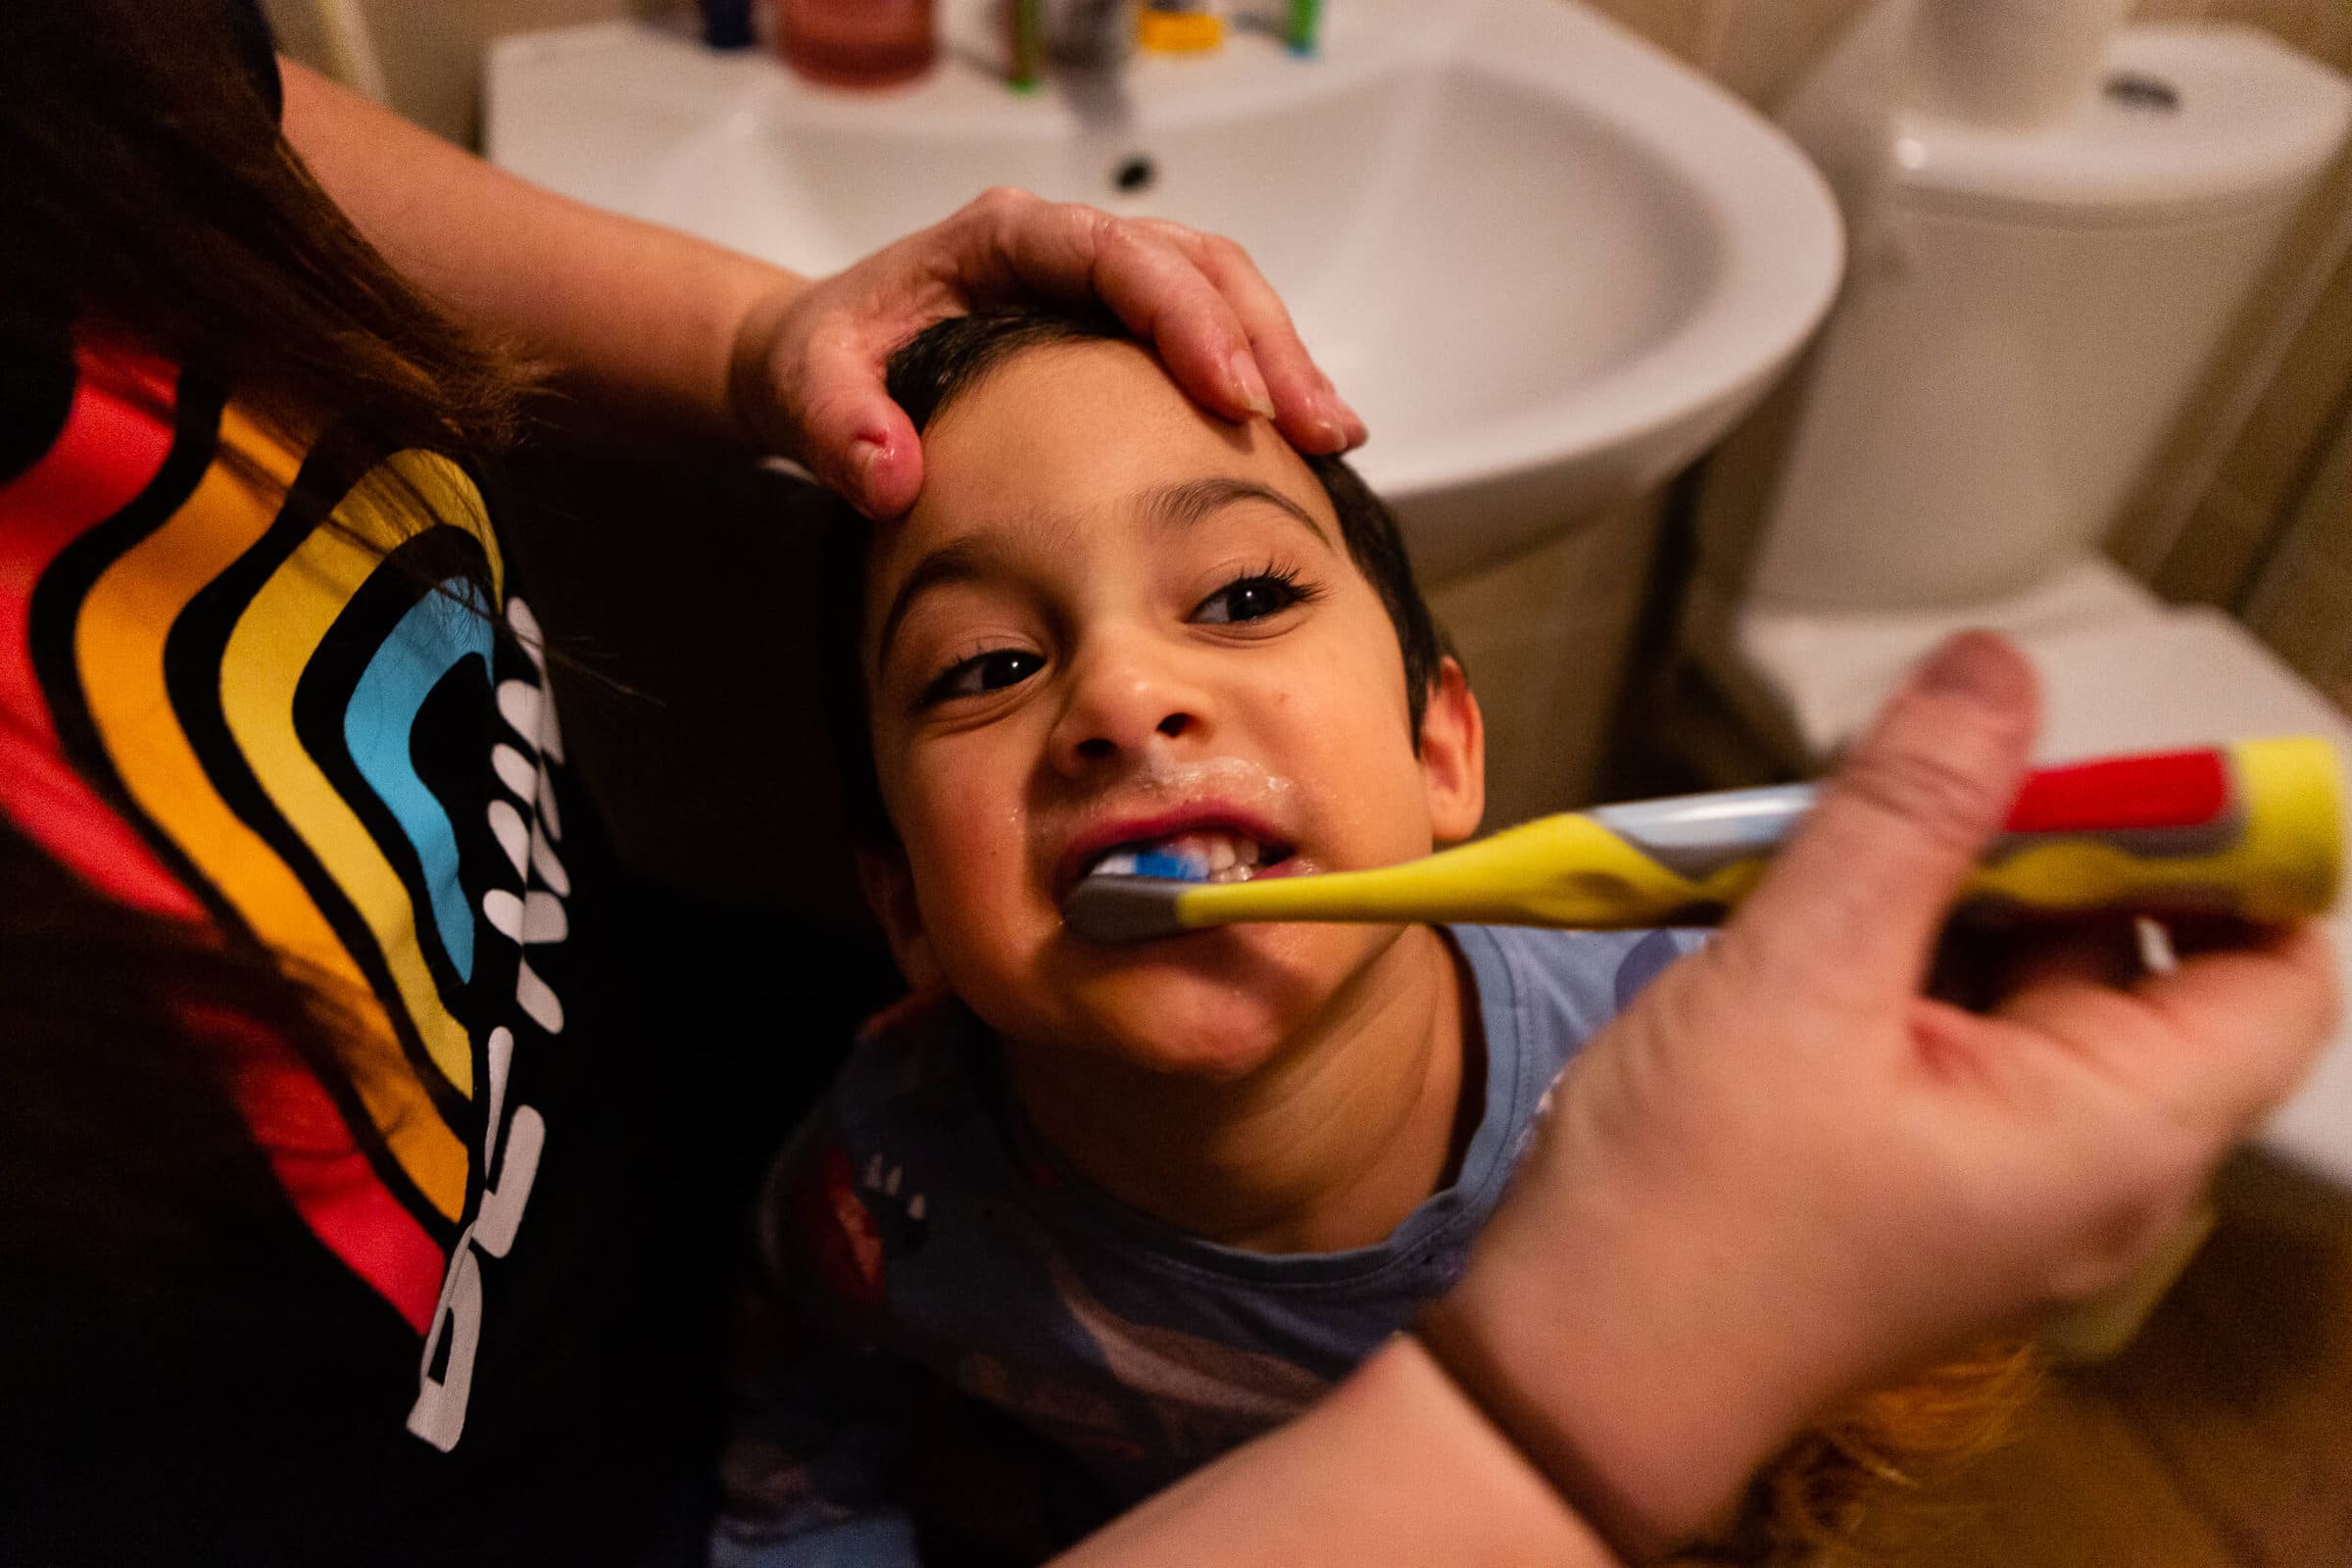 A mother brushing her young son's teeth | Rose Dedman Photography, Bristol